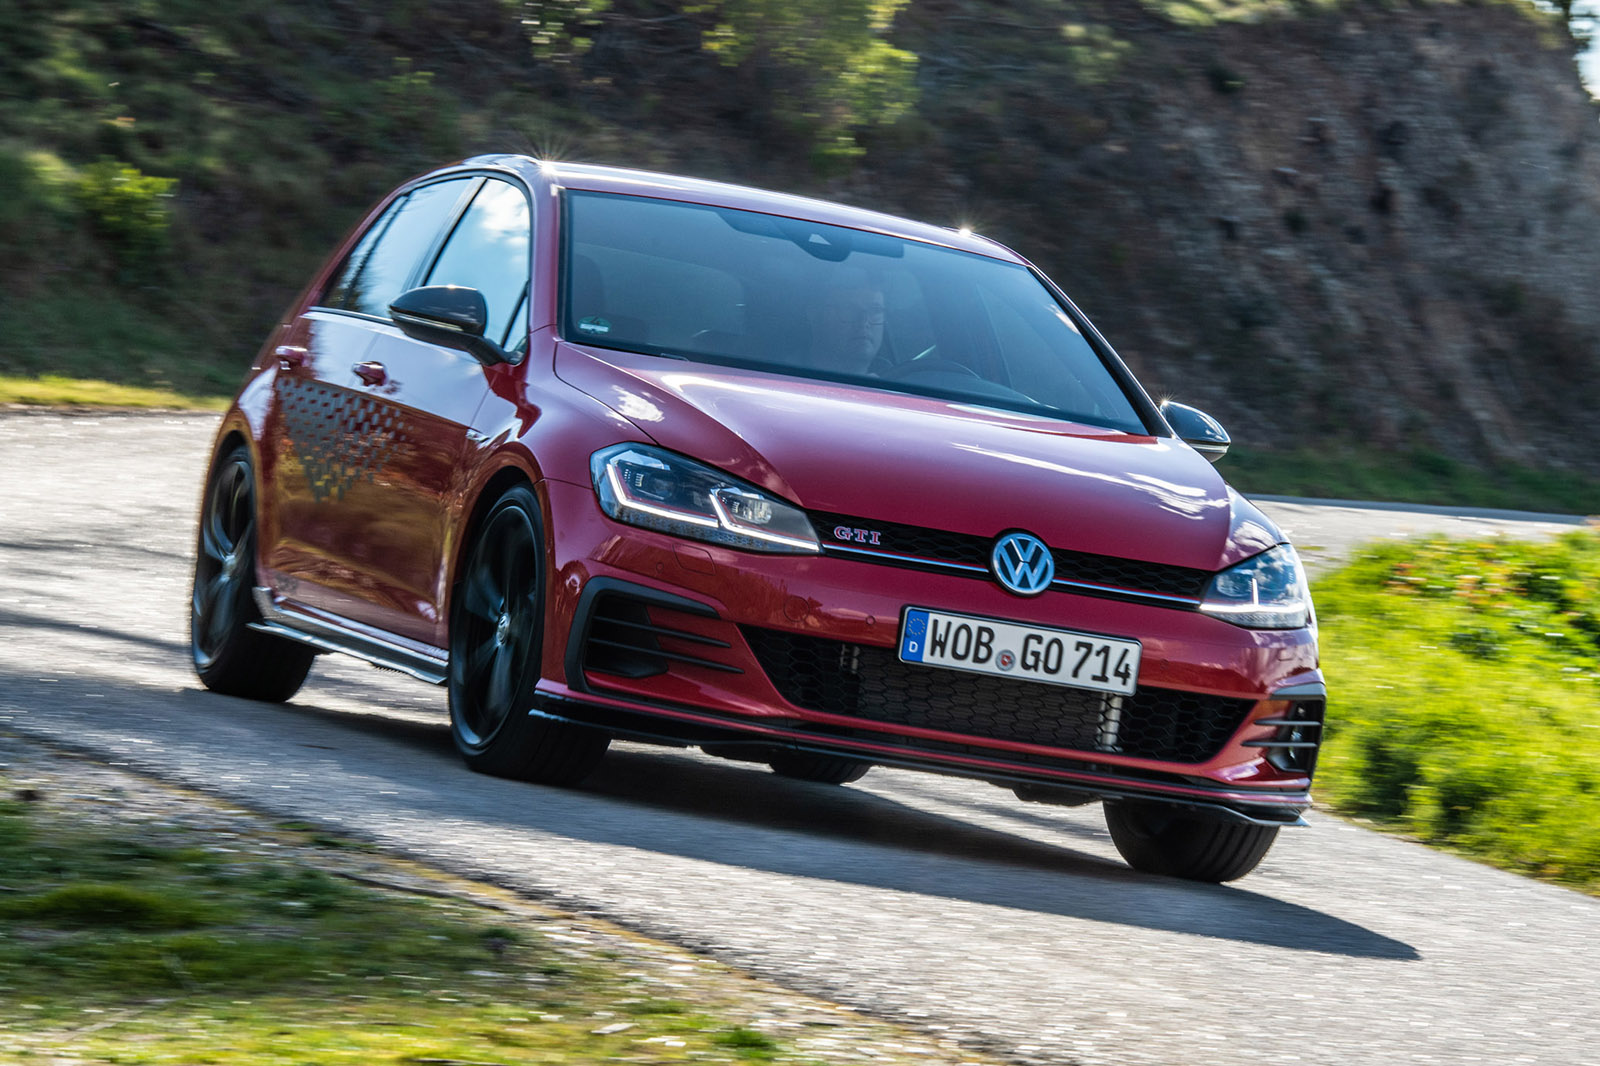 Used Volkswagen Golf GTI TCR 2019-2020 review